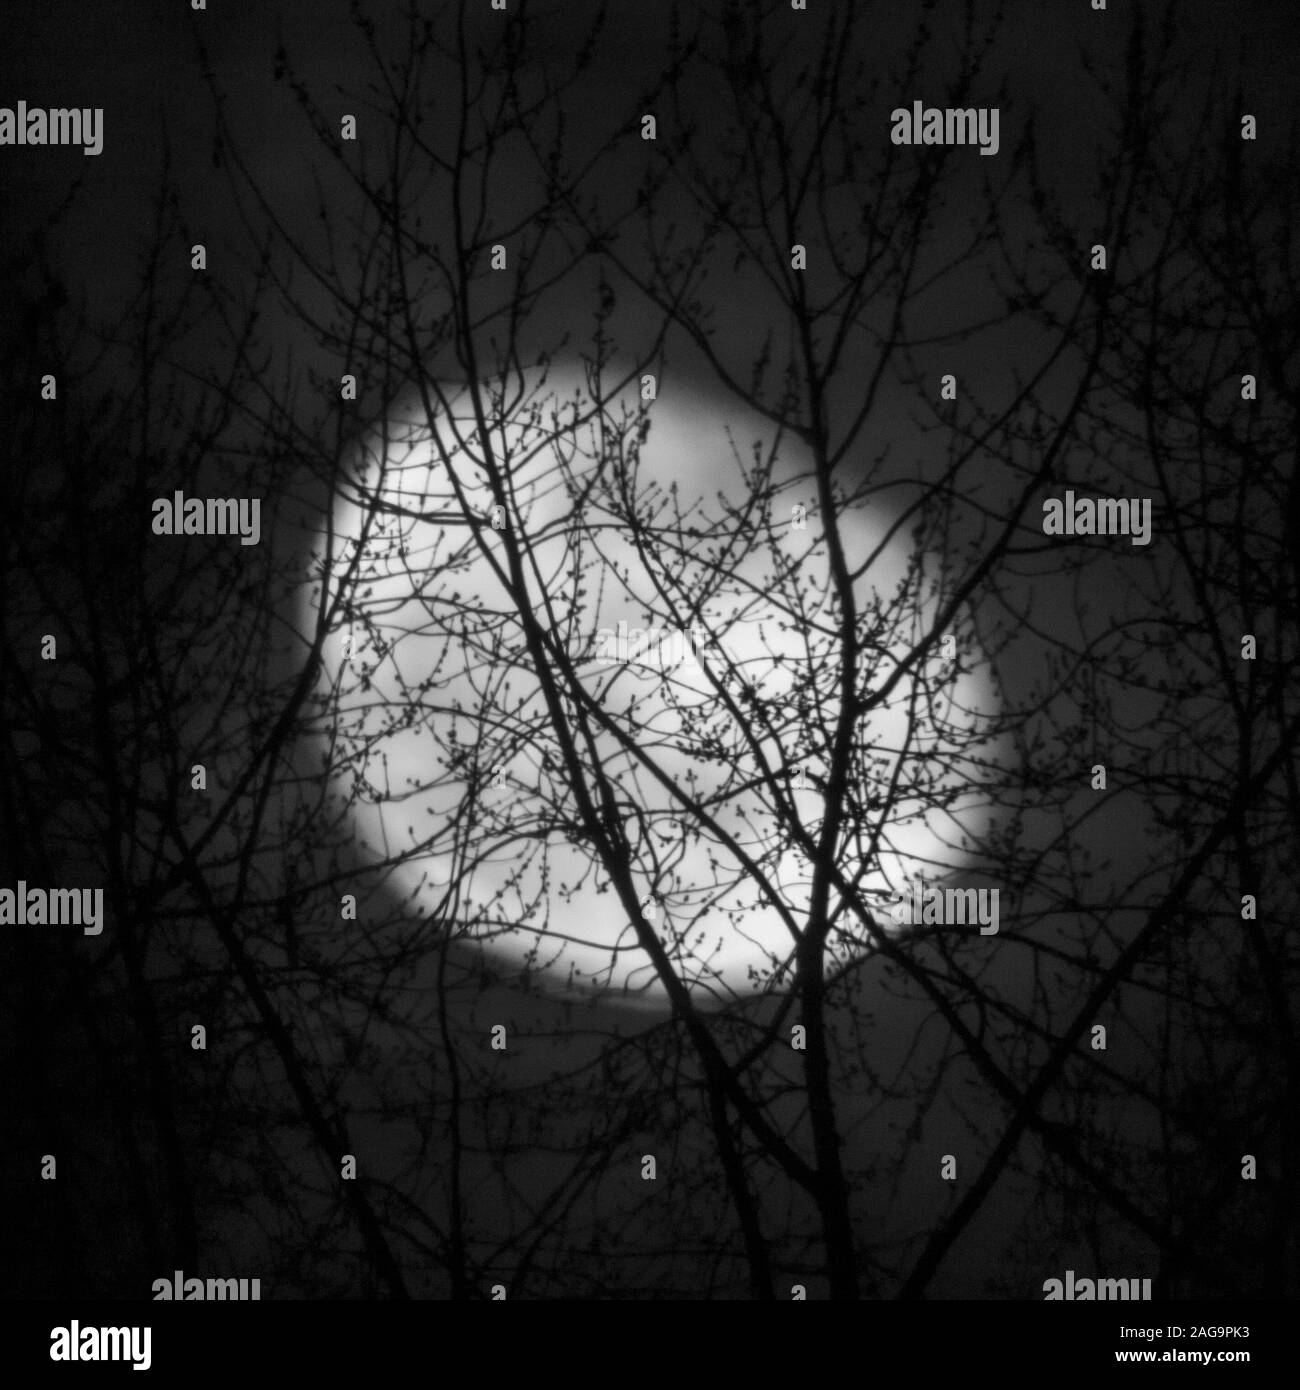 Grayscale shot of the blurring moon taken behind tree branches Stock Photo